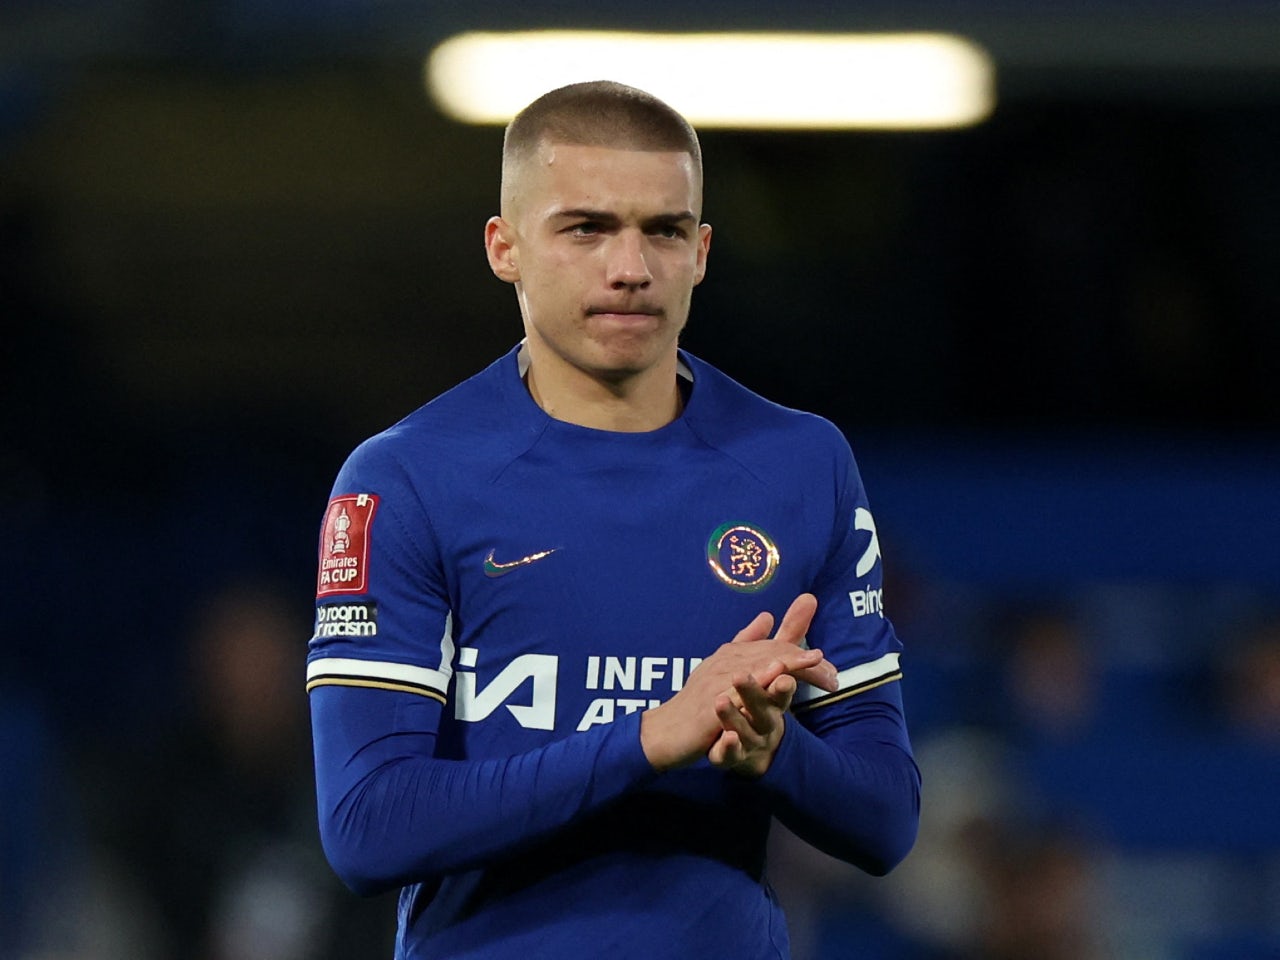 Chelsea transfer news: Championship, Serie A clubs 'keen' on Gilchrist loan deal